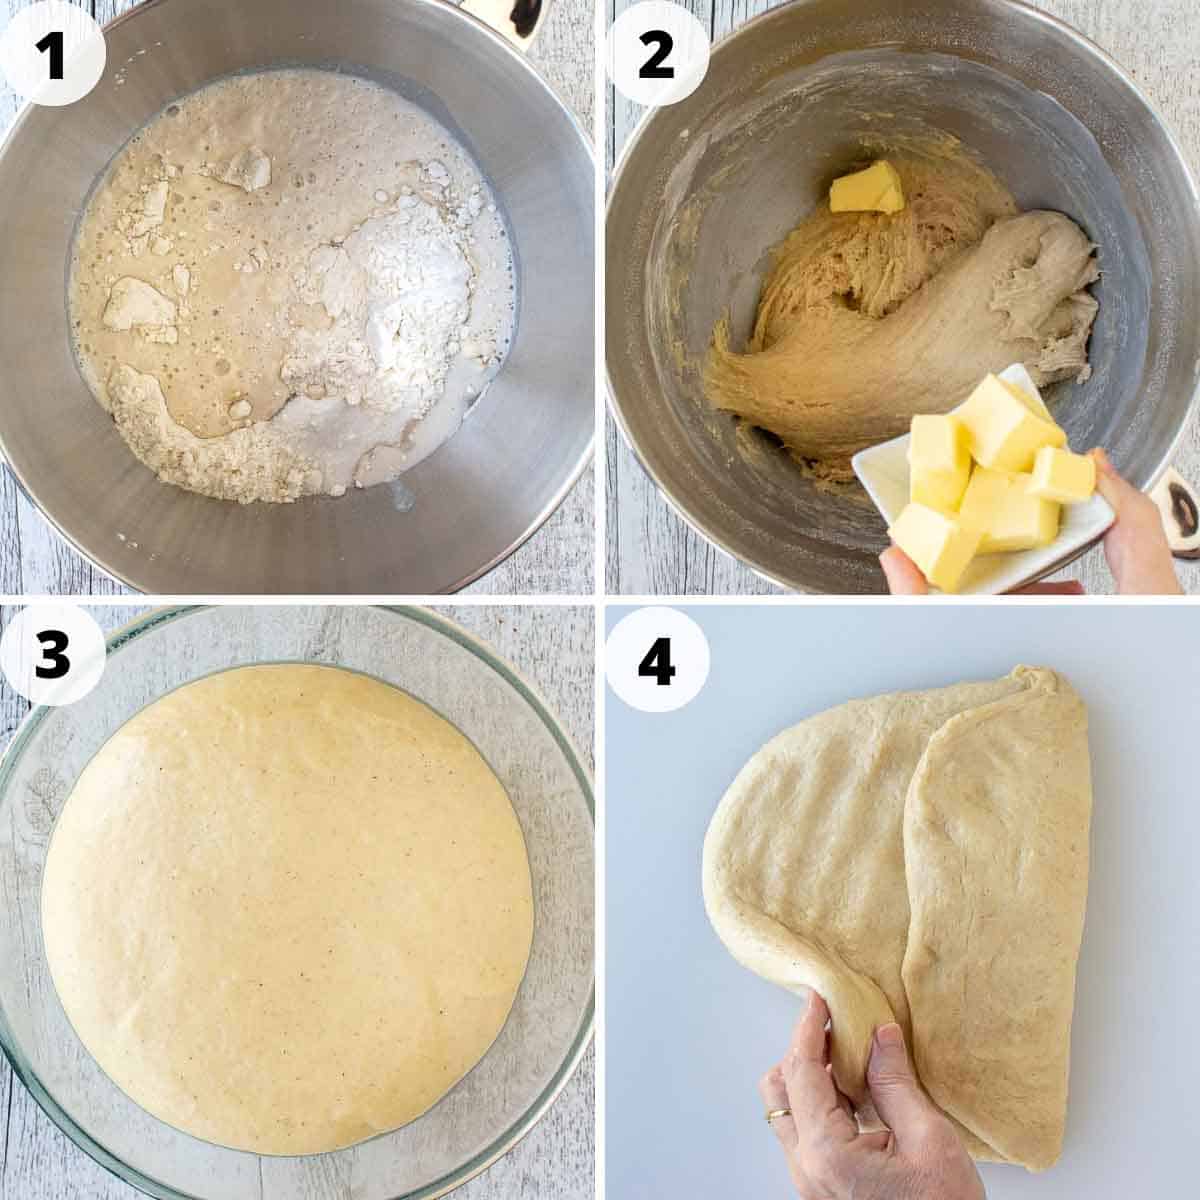 Four step process showing how to make this recipe as listed below.